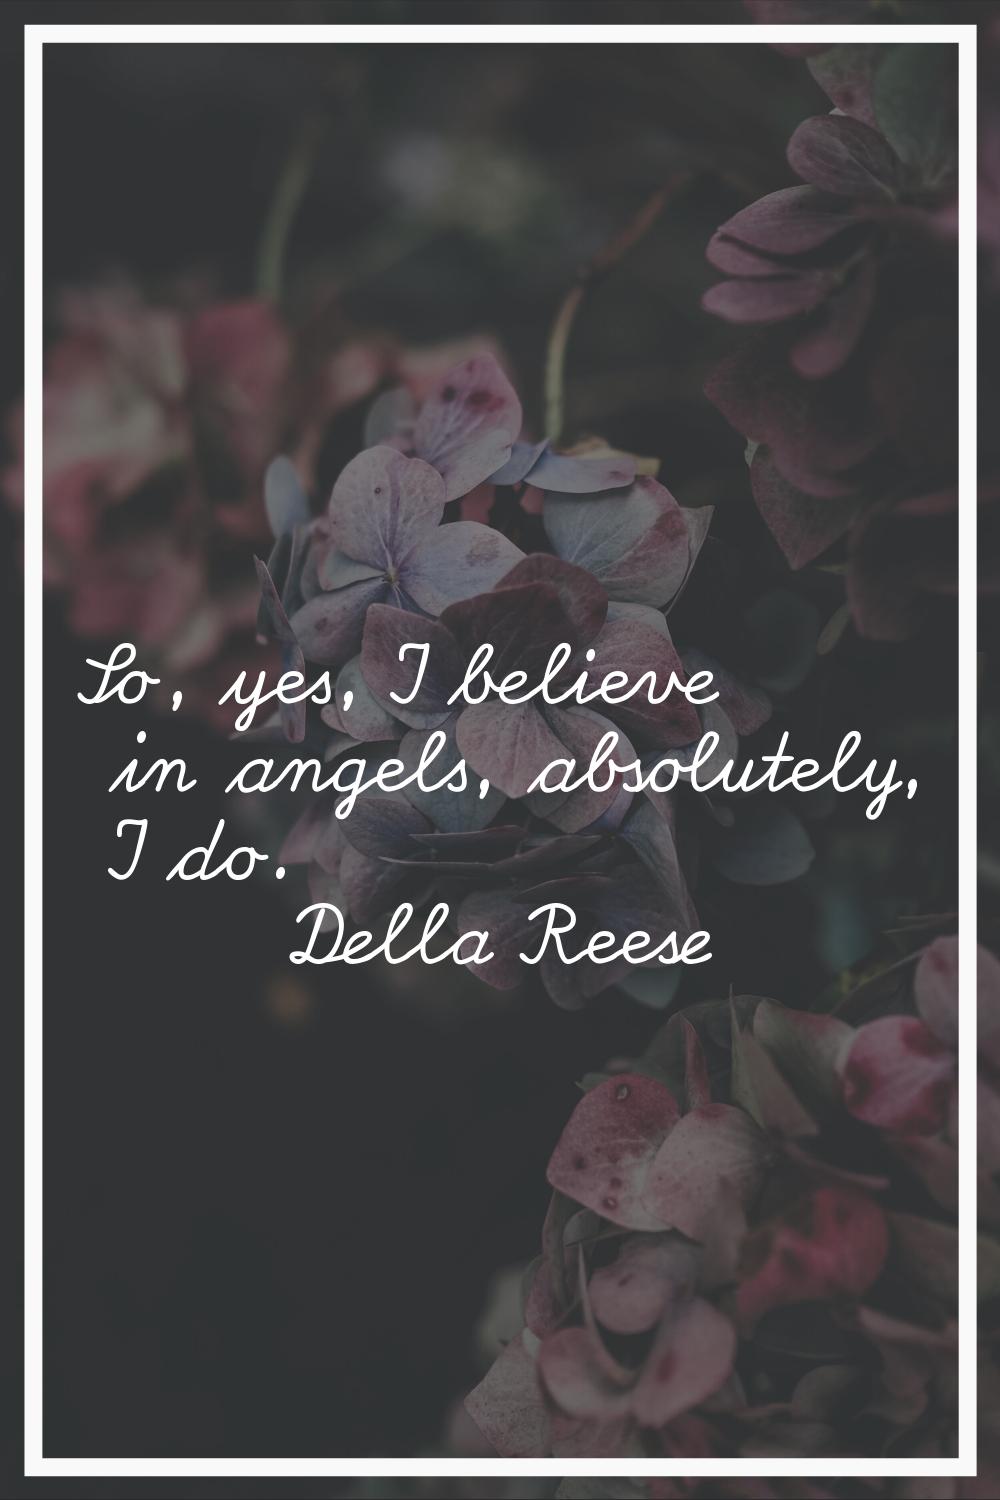 So, yes, I believe in angels, absolutely, I do.